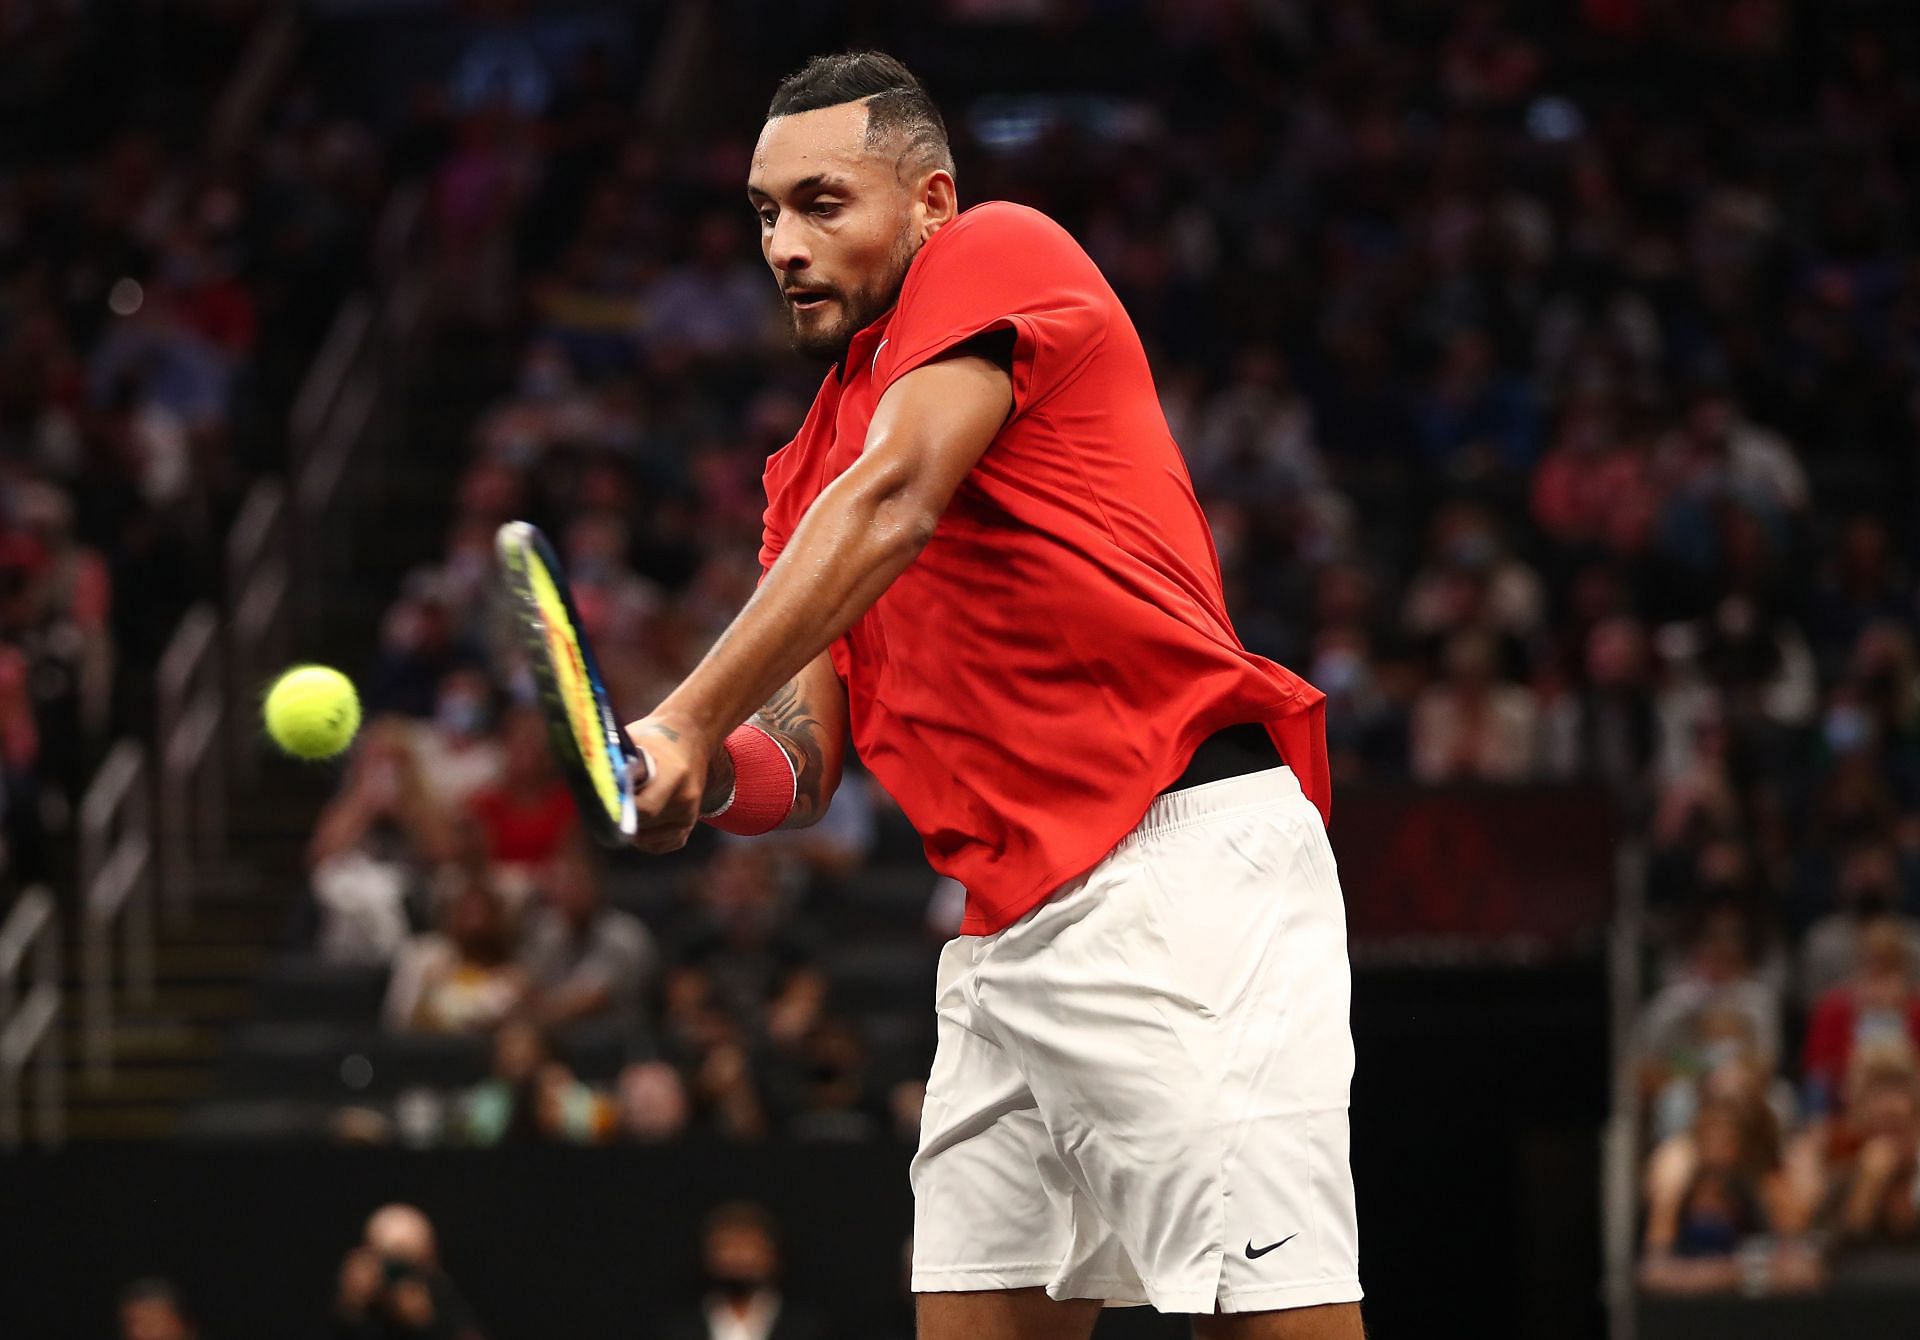 Nick Kyrgios of Team Europe on Day 2 of the 2021 Laver Cup at TD Garden on September 25, 2021 in Boston, Massachusetts